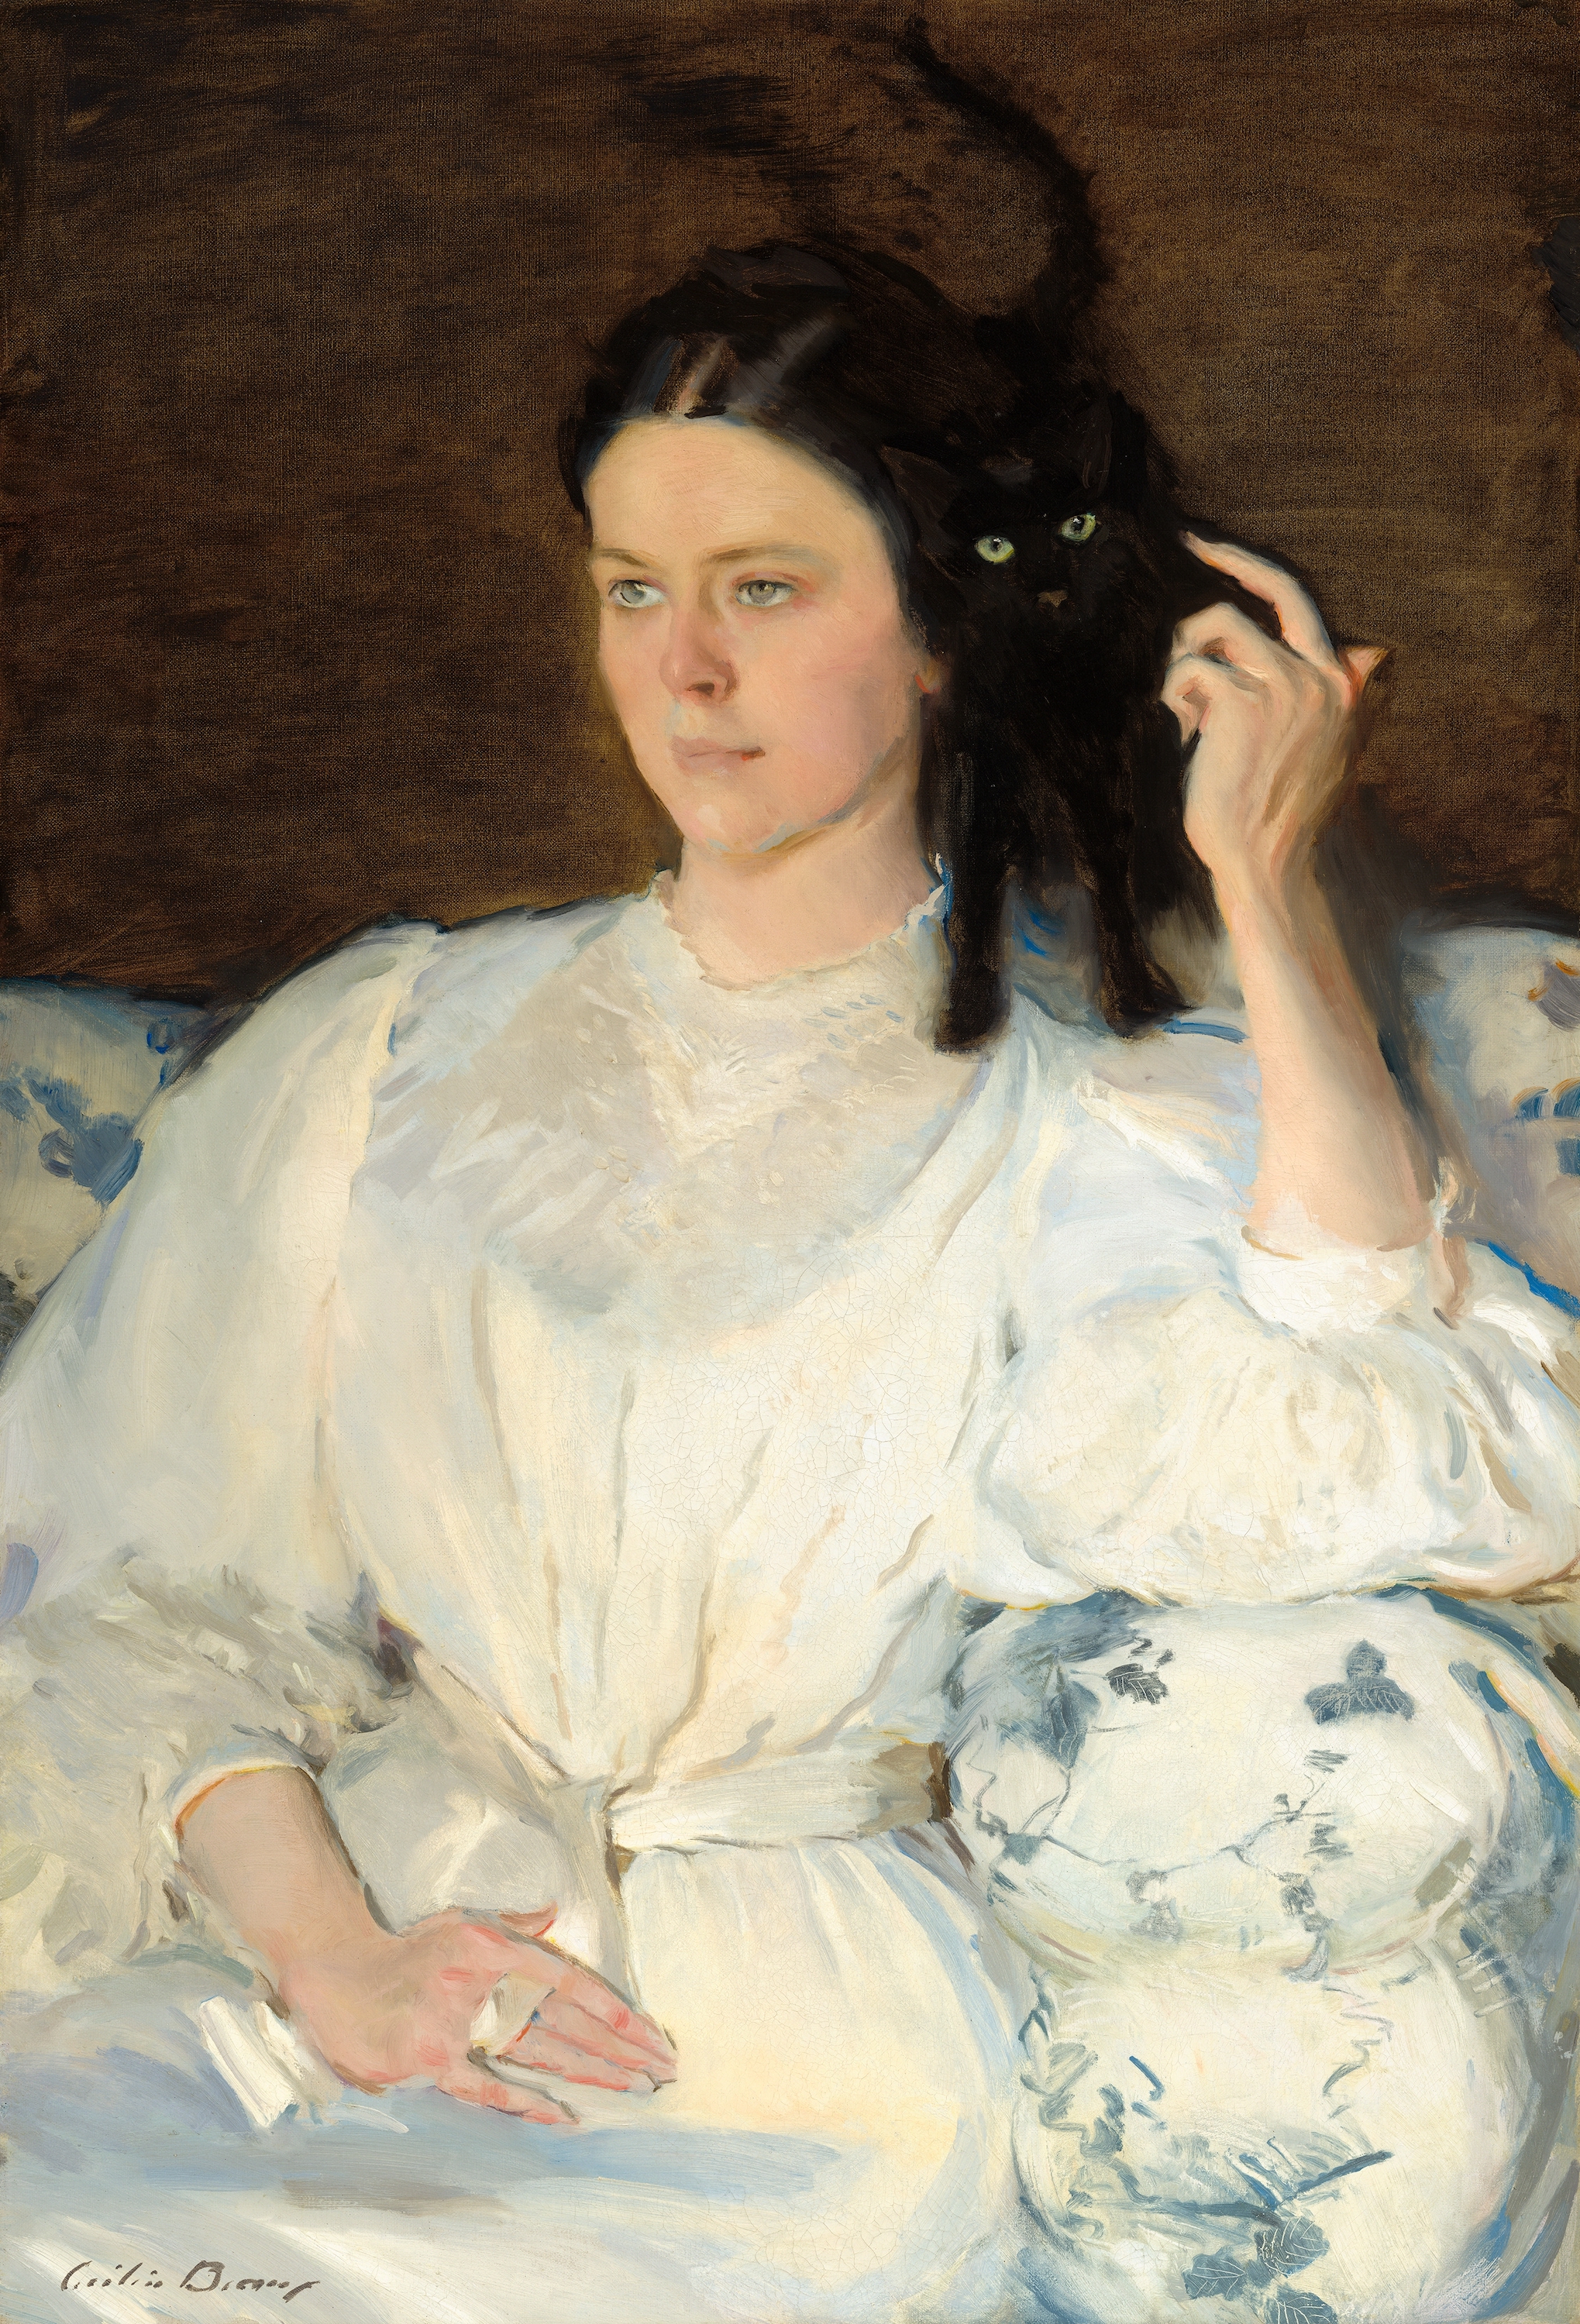 Sita and Sarita by Cecilia Beaux - c. 1921 - 113.3 × 83.8 cm National Gallery of Art